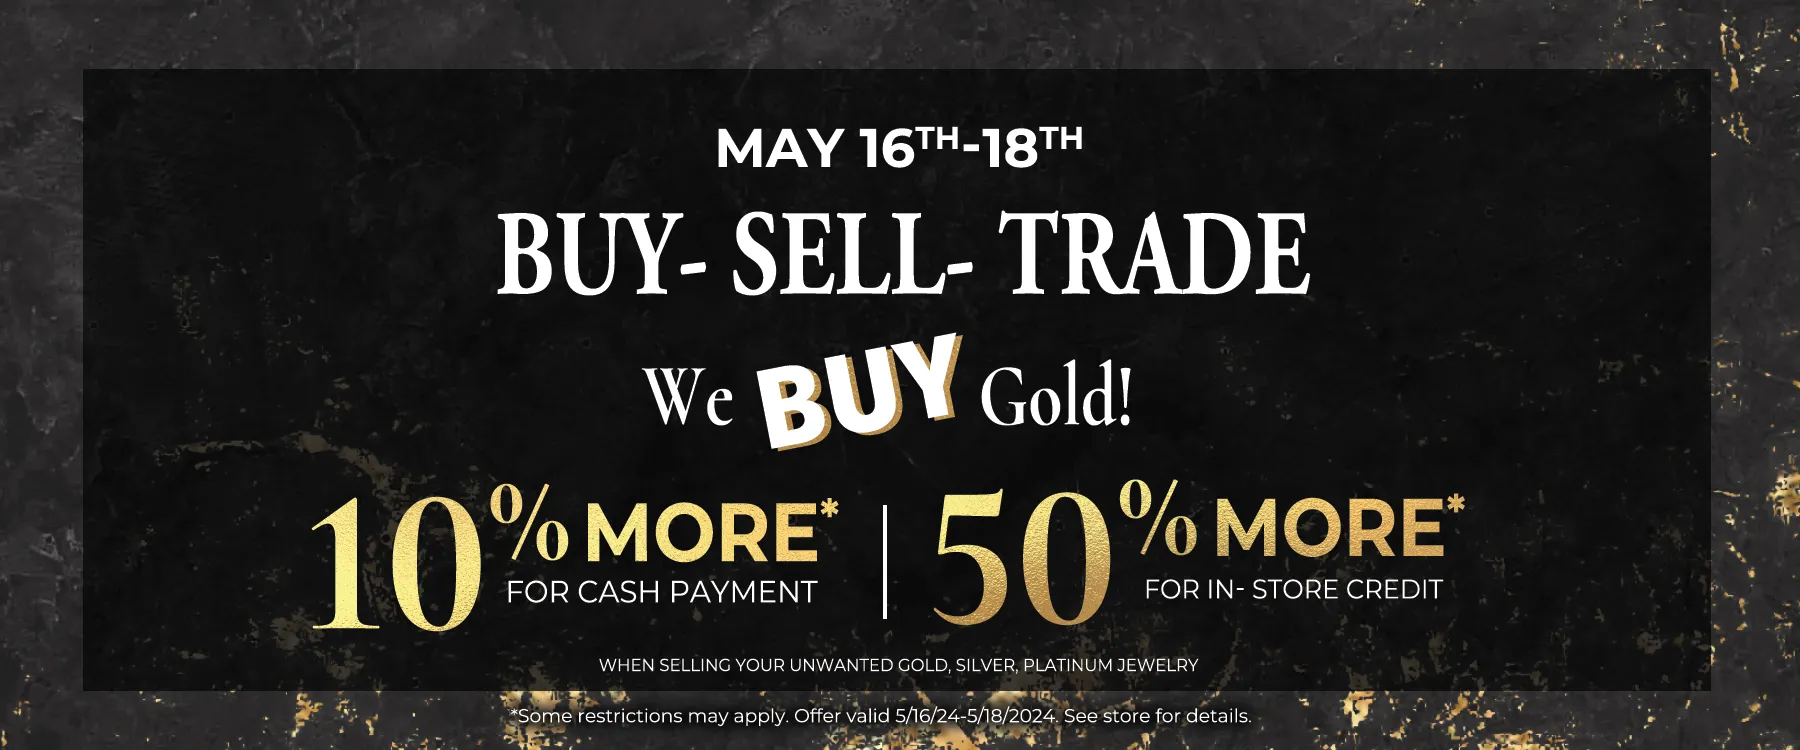 Gold Buying Event May 16 - 18